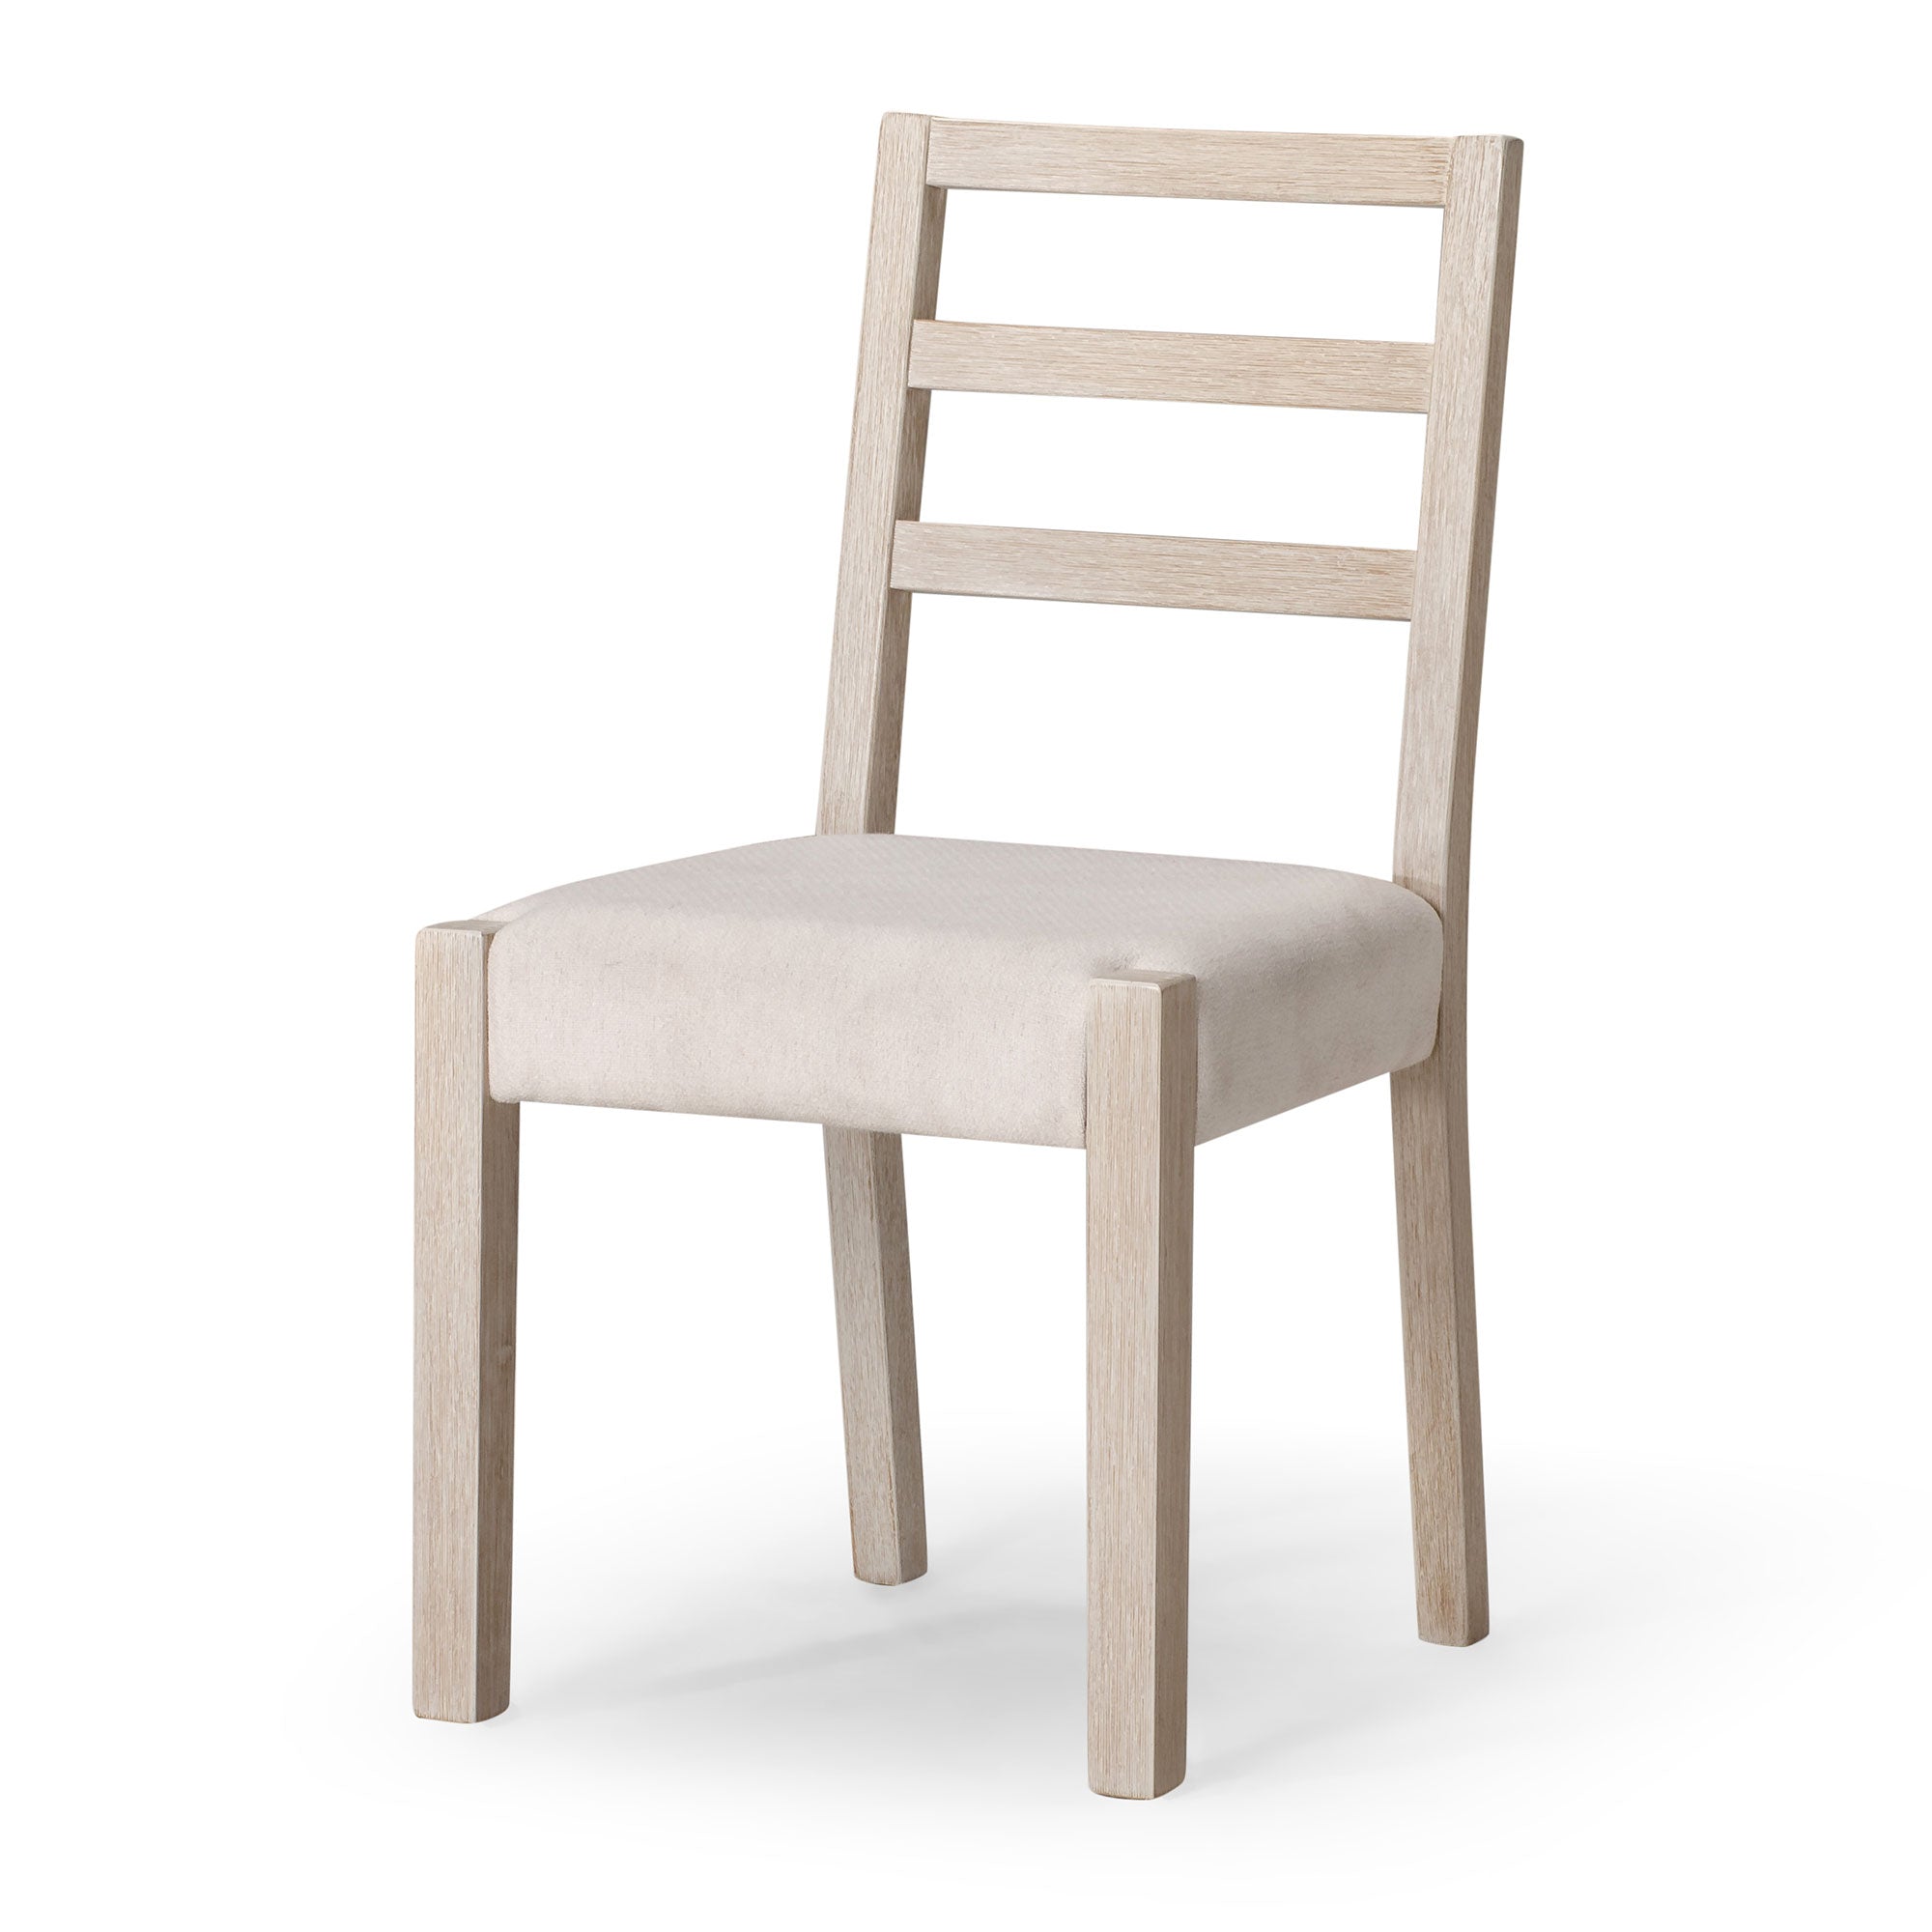 Willow Organic Wooden Dining Chair in Weathered White Finish with Cream Weave Fabric Upholstery, Set of 2 in Dining Furniture by Maven Lane